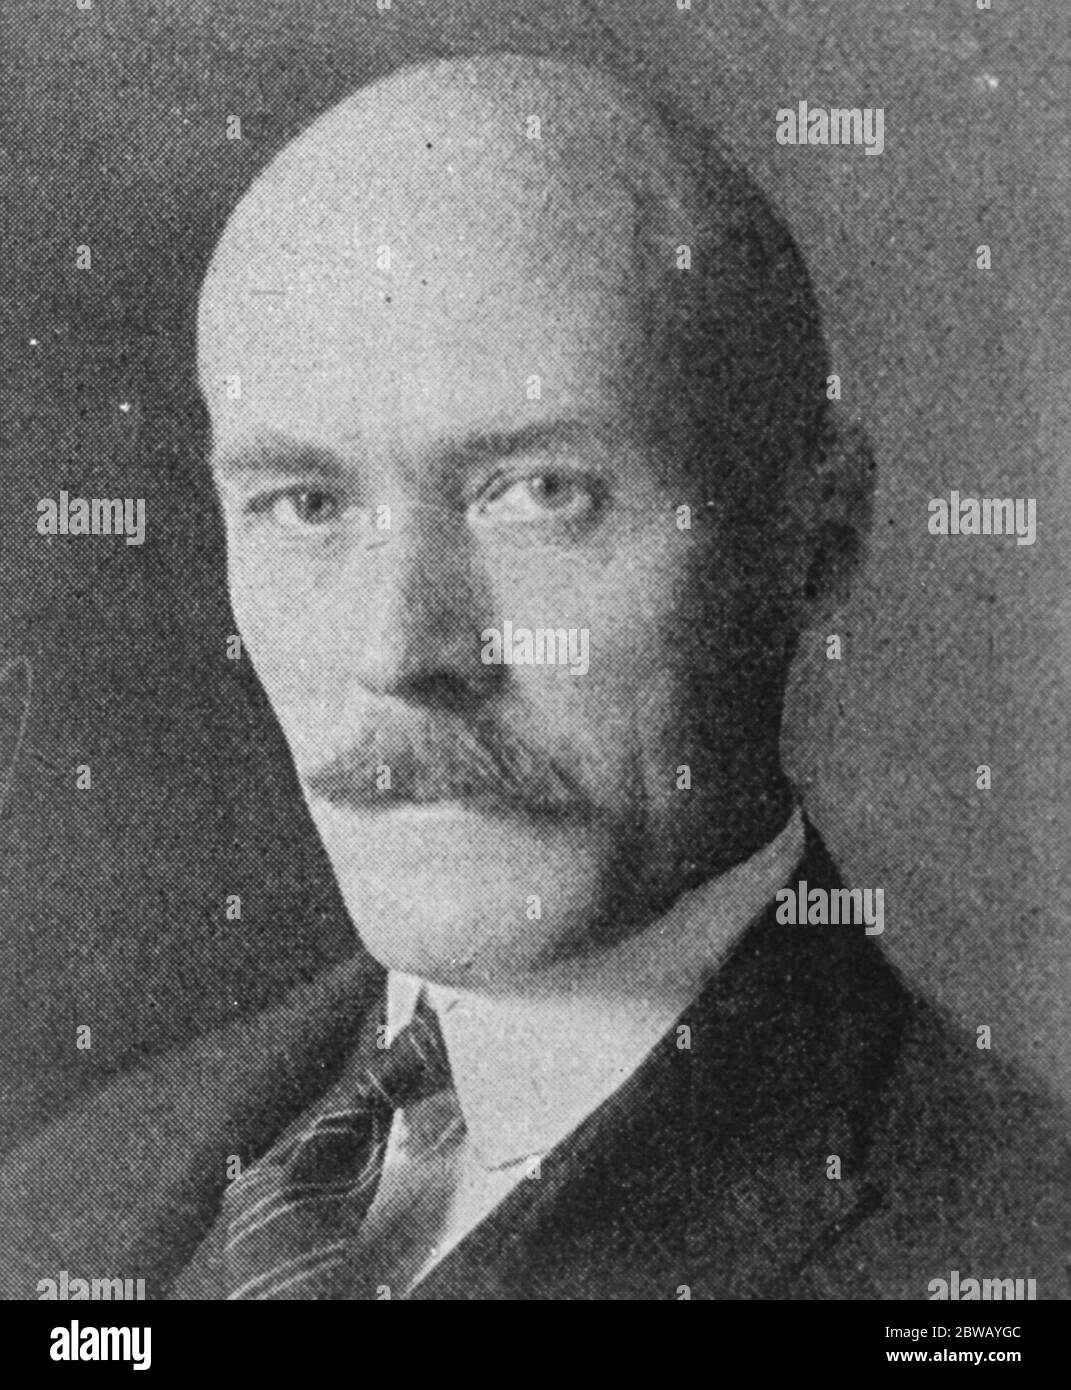 German Count arrested . Count Gunther von der Schulenburg , a supporter of the Separatist Movement in the Rhineland , who is reported to have been arrested by the German police whilst in unoccupied territory . 13 January 1923 Stock Photo